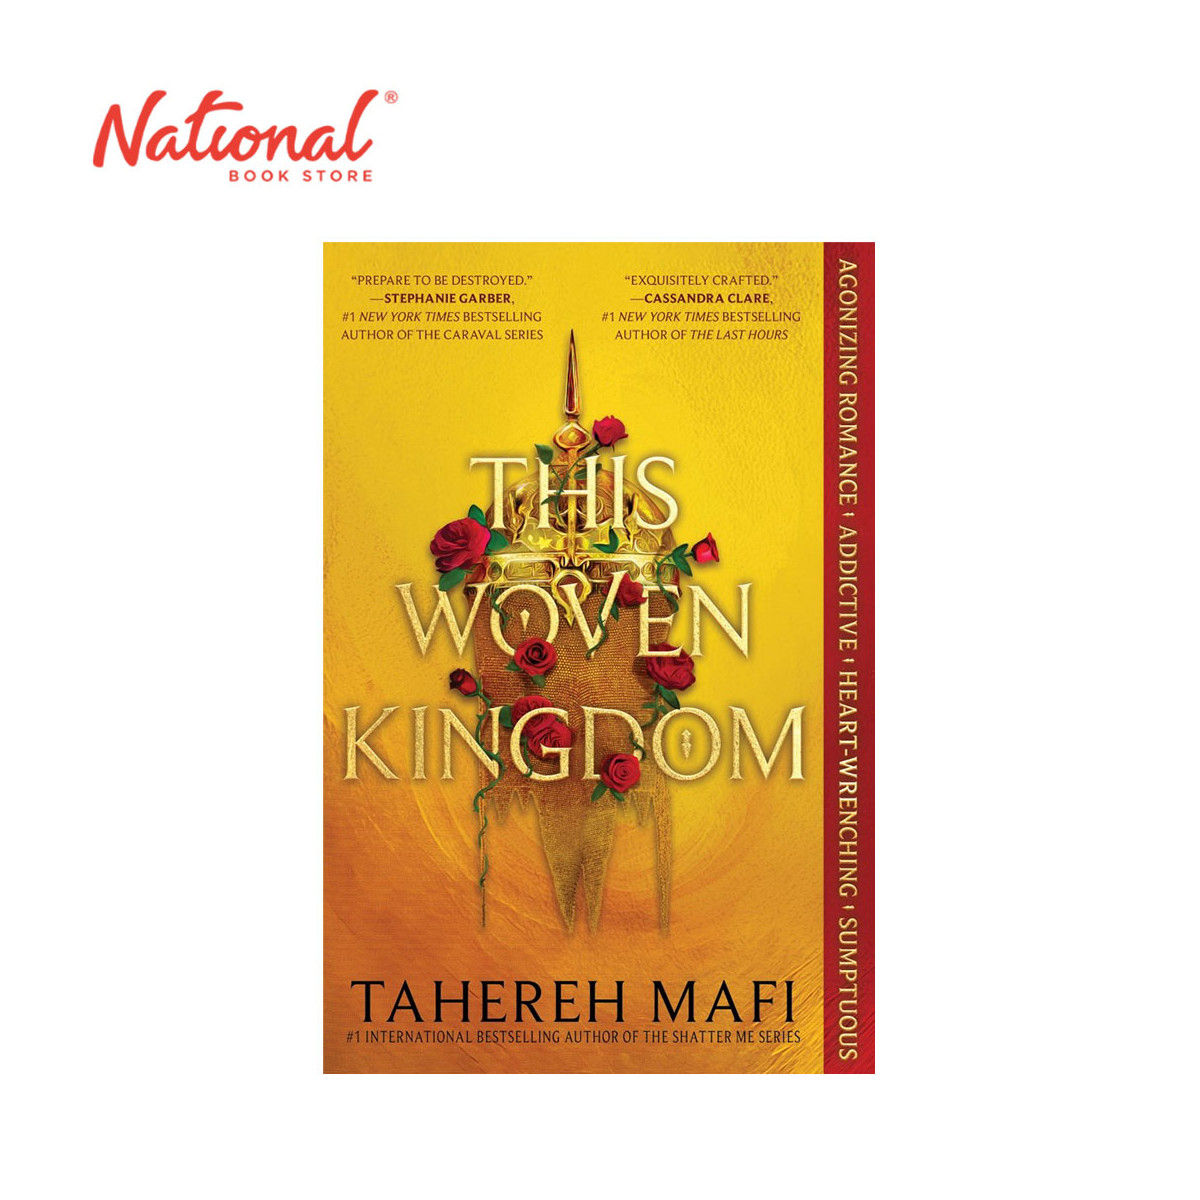 This Woven Kingdom by Tahereh Mafi - Trade Paperback - Teens Fiction